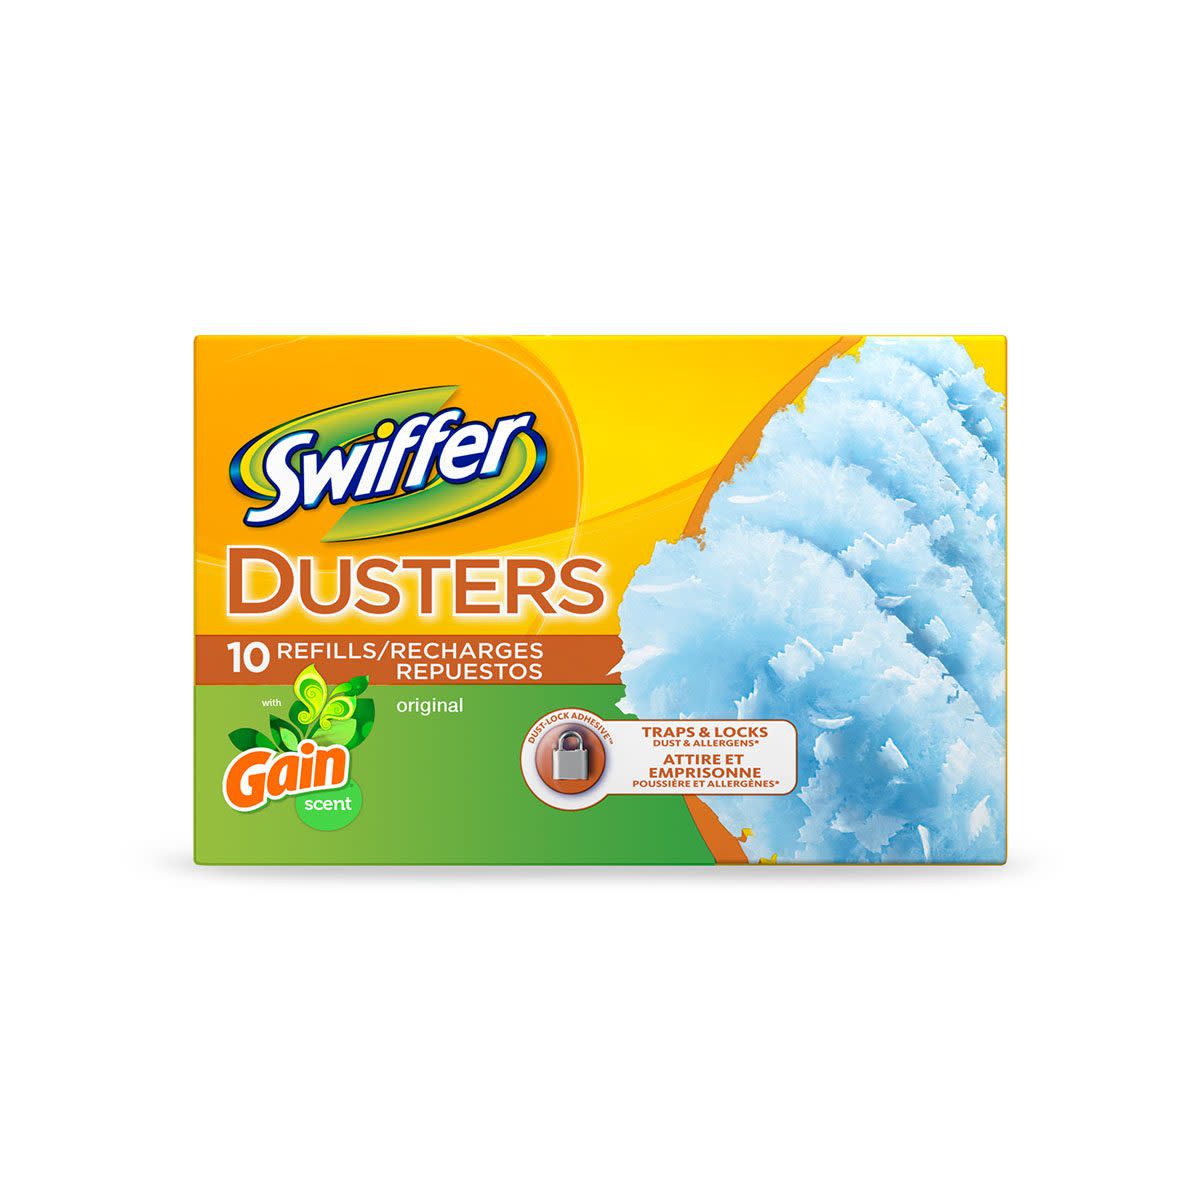 Recharges Duster Swiffer avec Gain